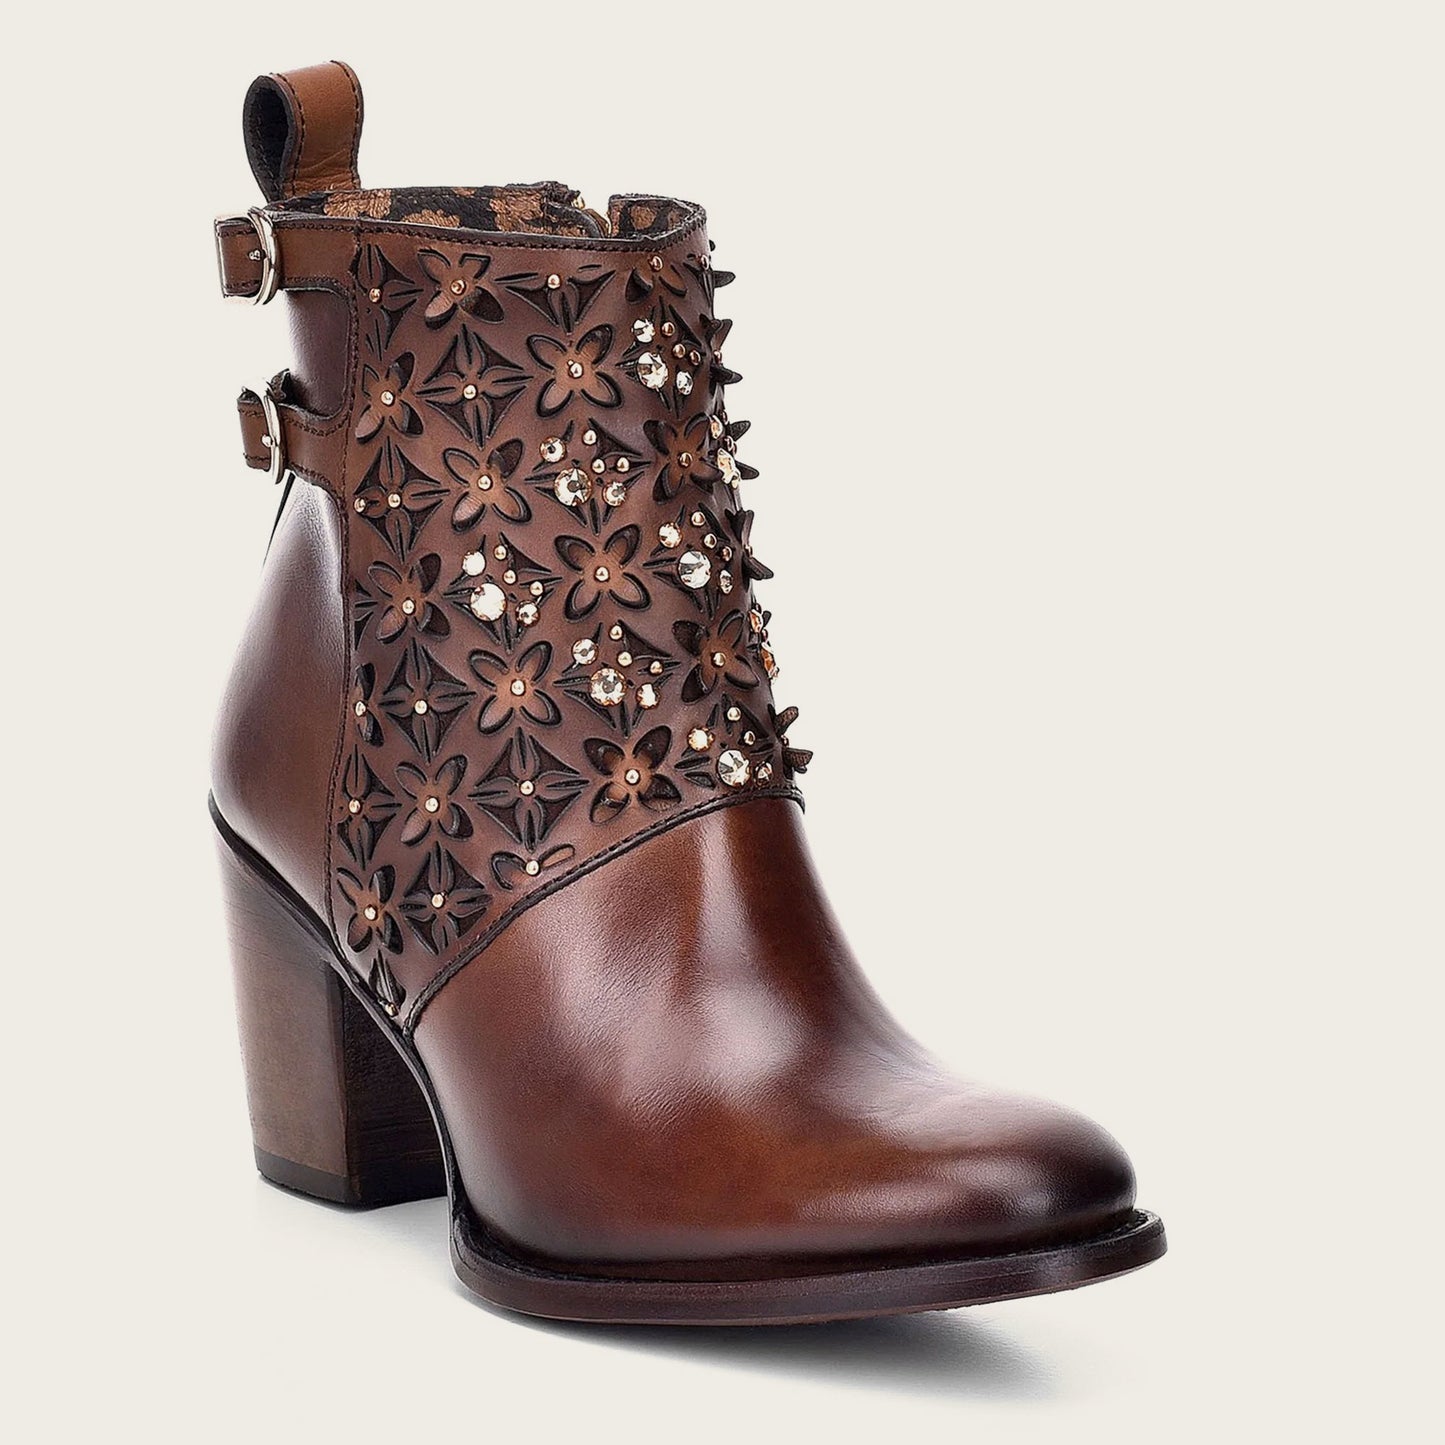 Handcrafted perforated brown leather bootie adorned with Austrian crystals.